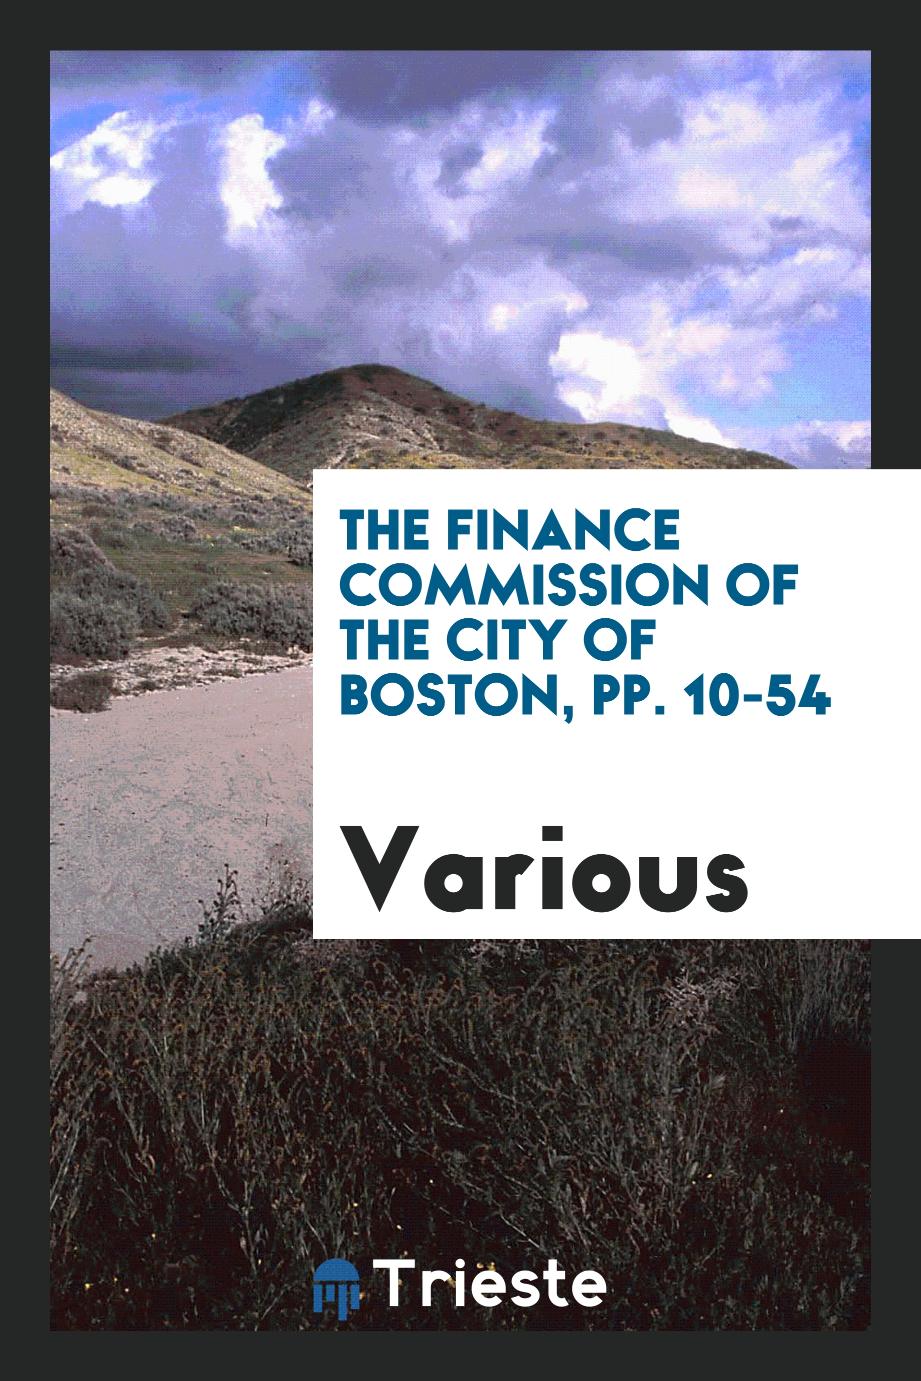 The finance commission of the City of Boston, pp. 10-54